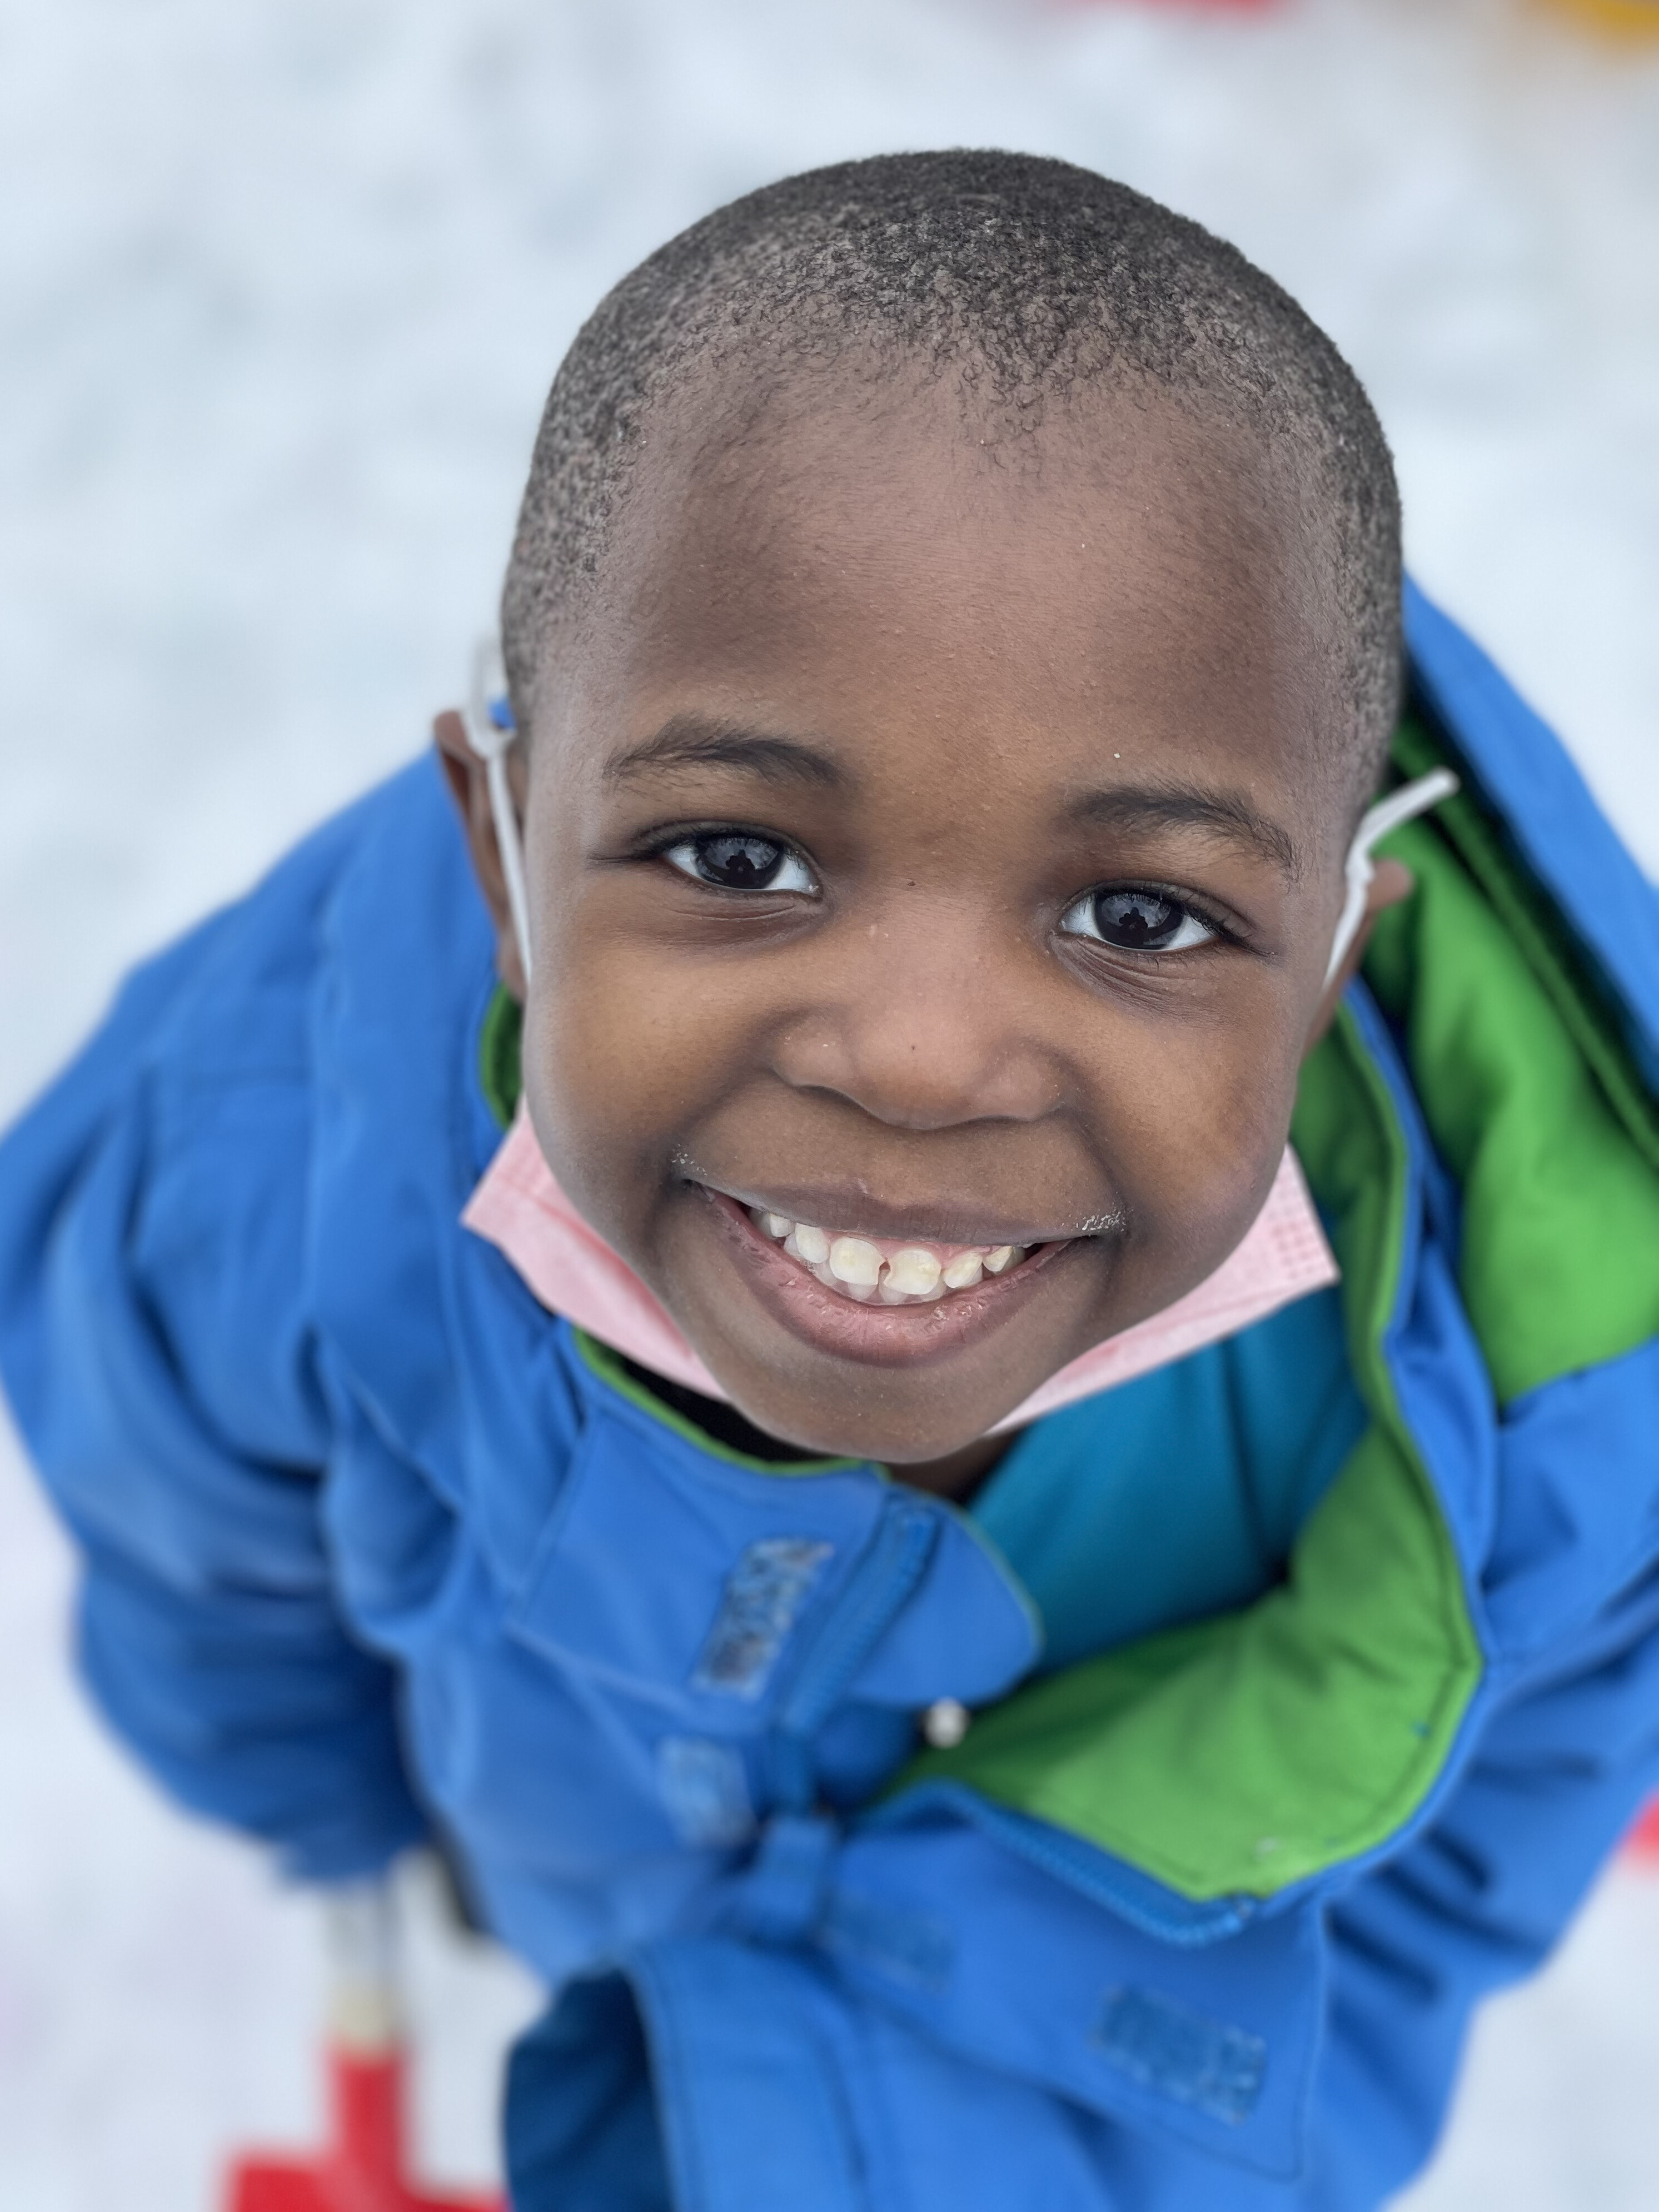 Photograph of a young black boy outside smiling up towards the camera. The boy has short hair and is wearing a blue snow suit outside with snow around him.